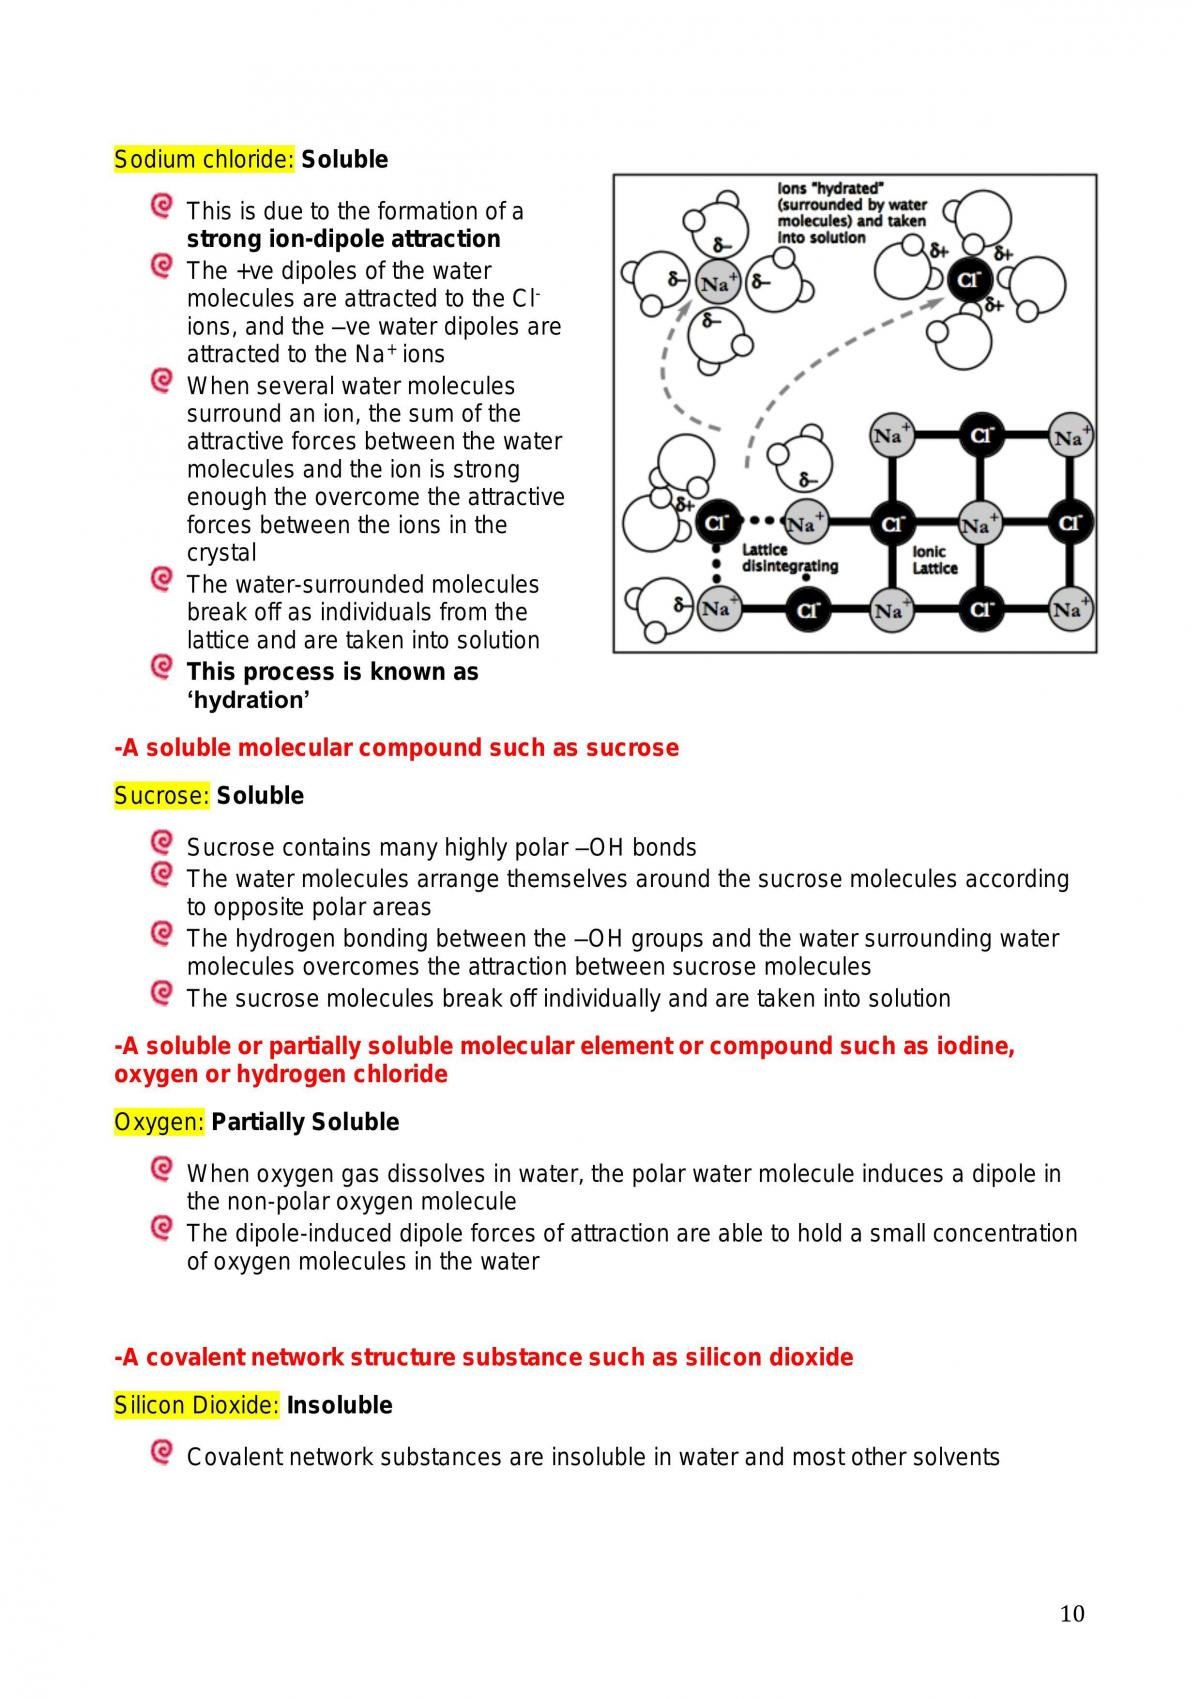 Year 11 Chemistry Study Notes: Module 3 (Water) - Page 10